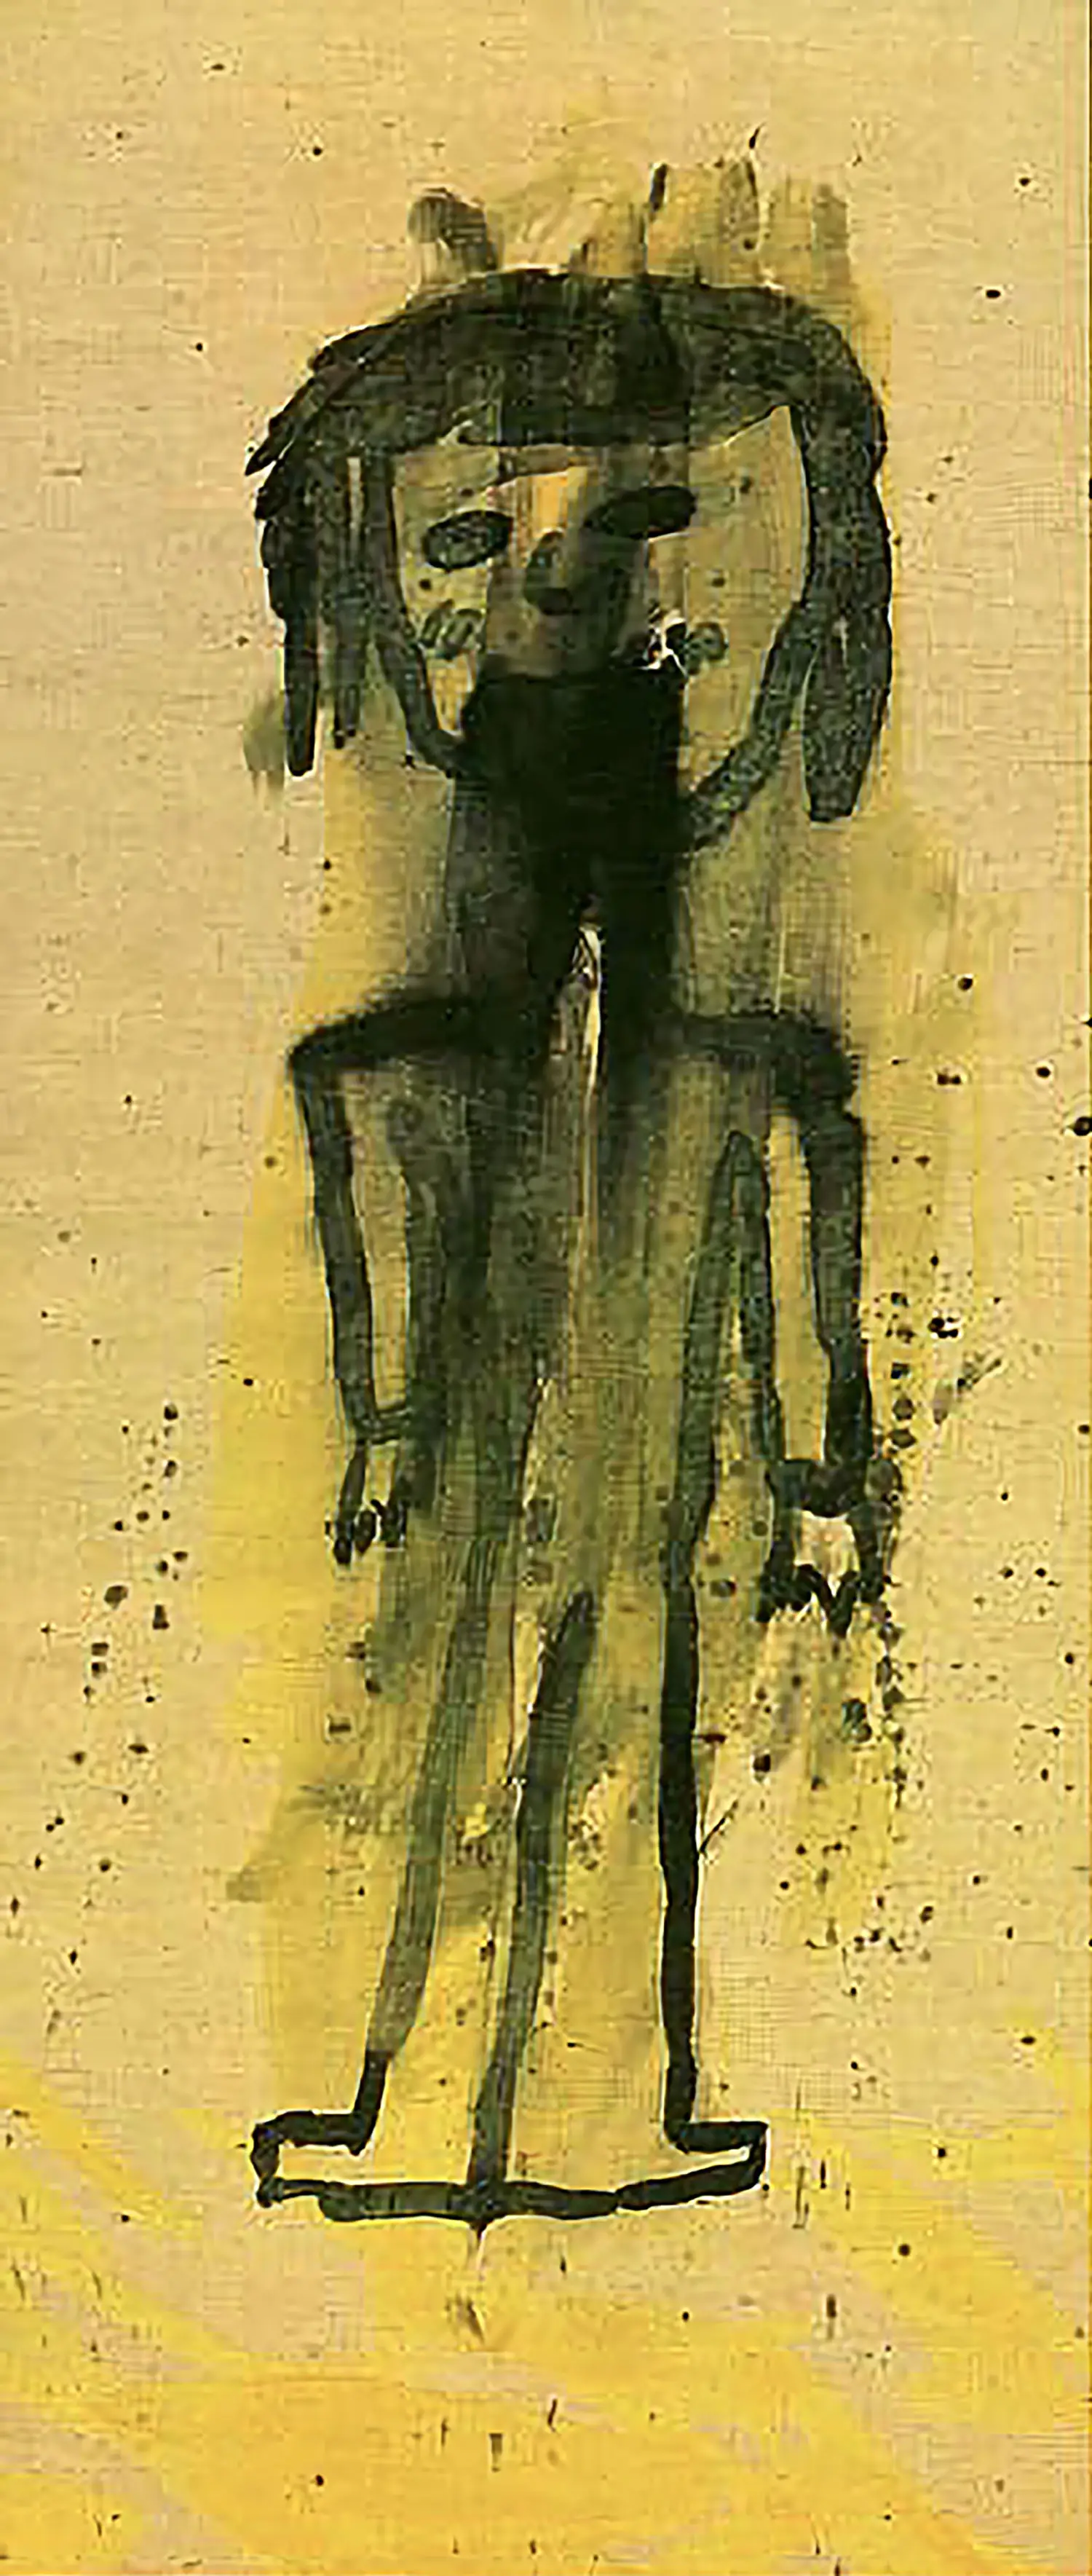 A painting of a child. Dark smears cover the child, partially obscuring the face.